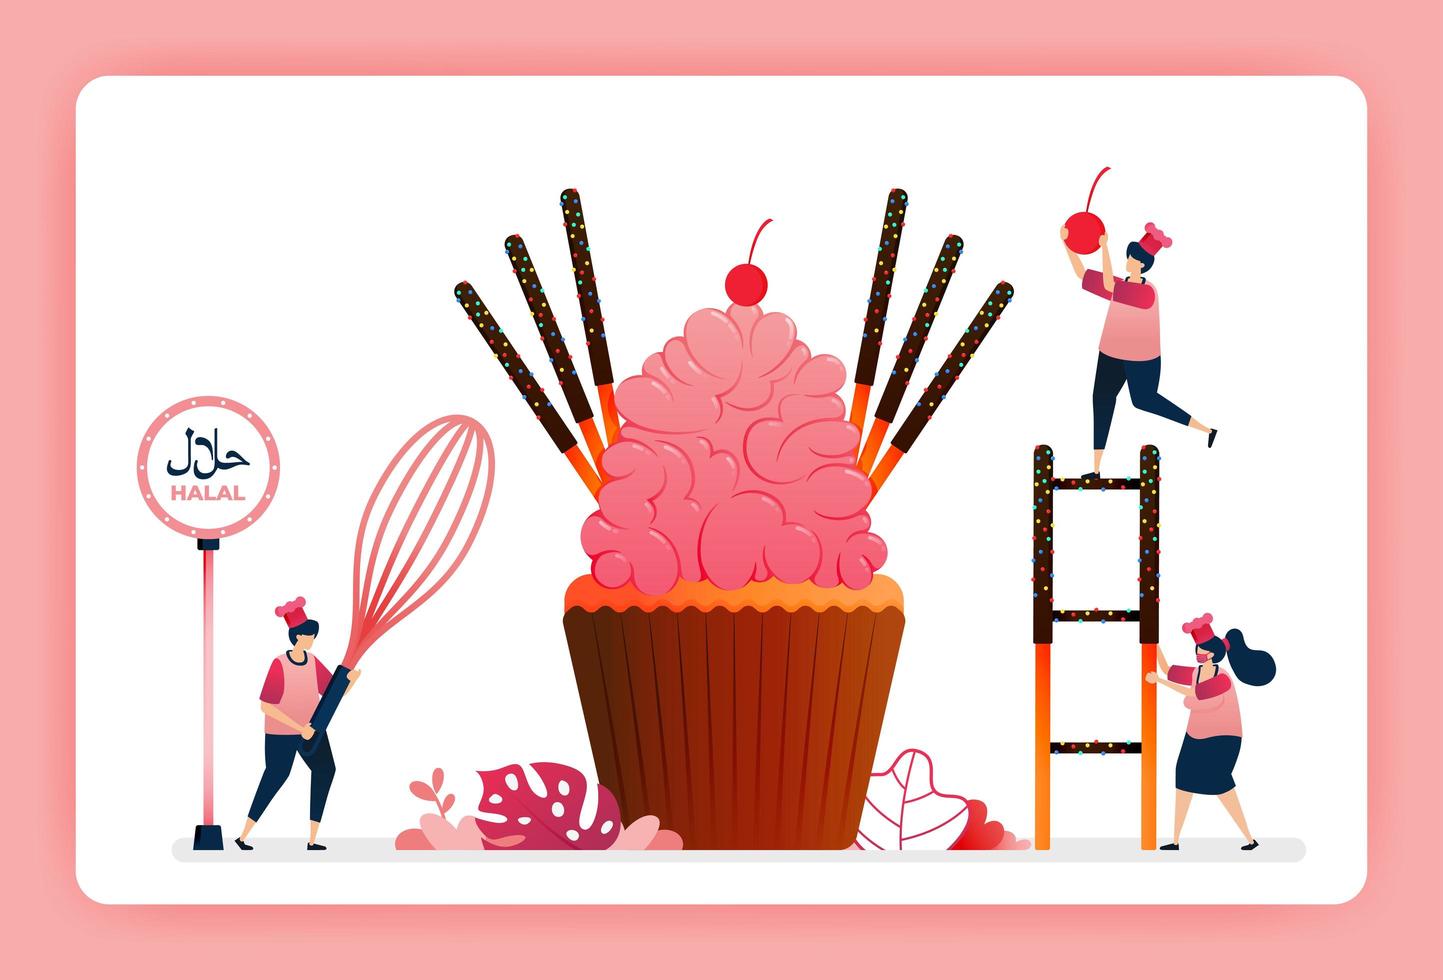 Illustration of cook halal sweet strawberry cupcakes. Pink sugar icing with chocolate cake sticks and candy. Design can use for website, web, landing page, banner, mobile apps, ui ux, poster, flyer vector